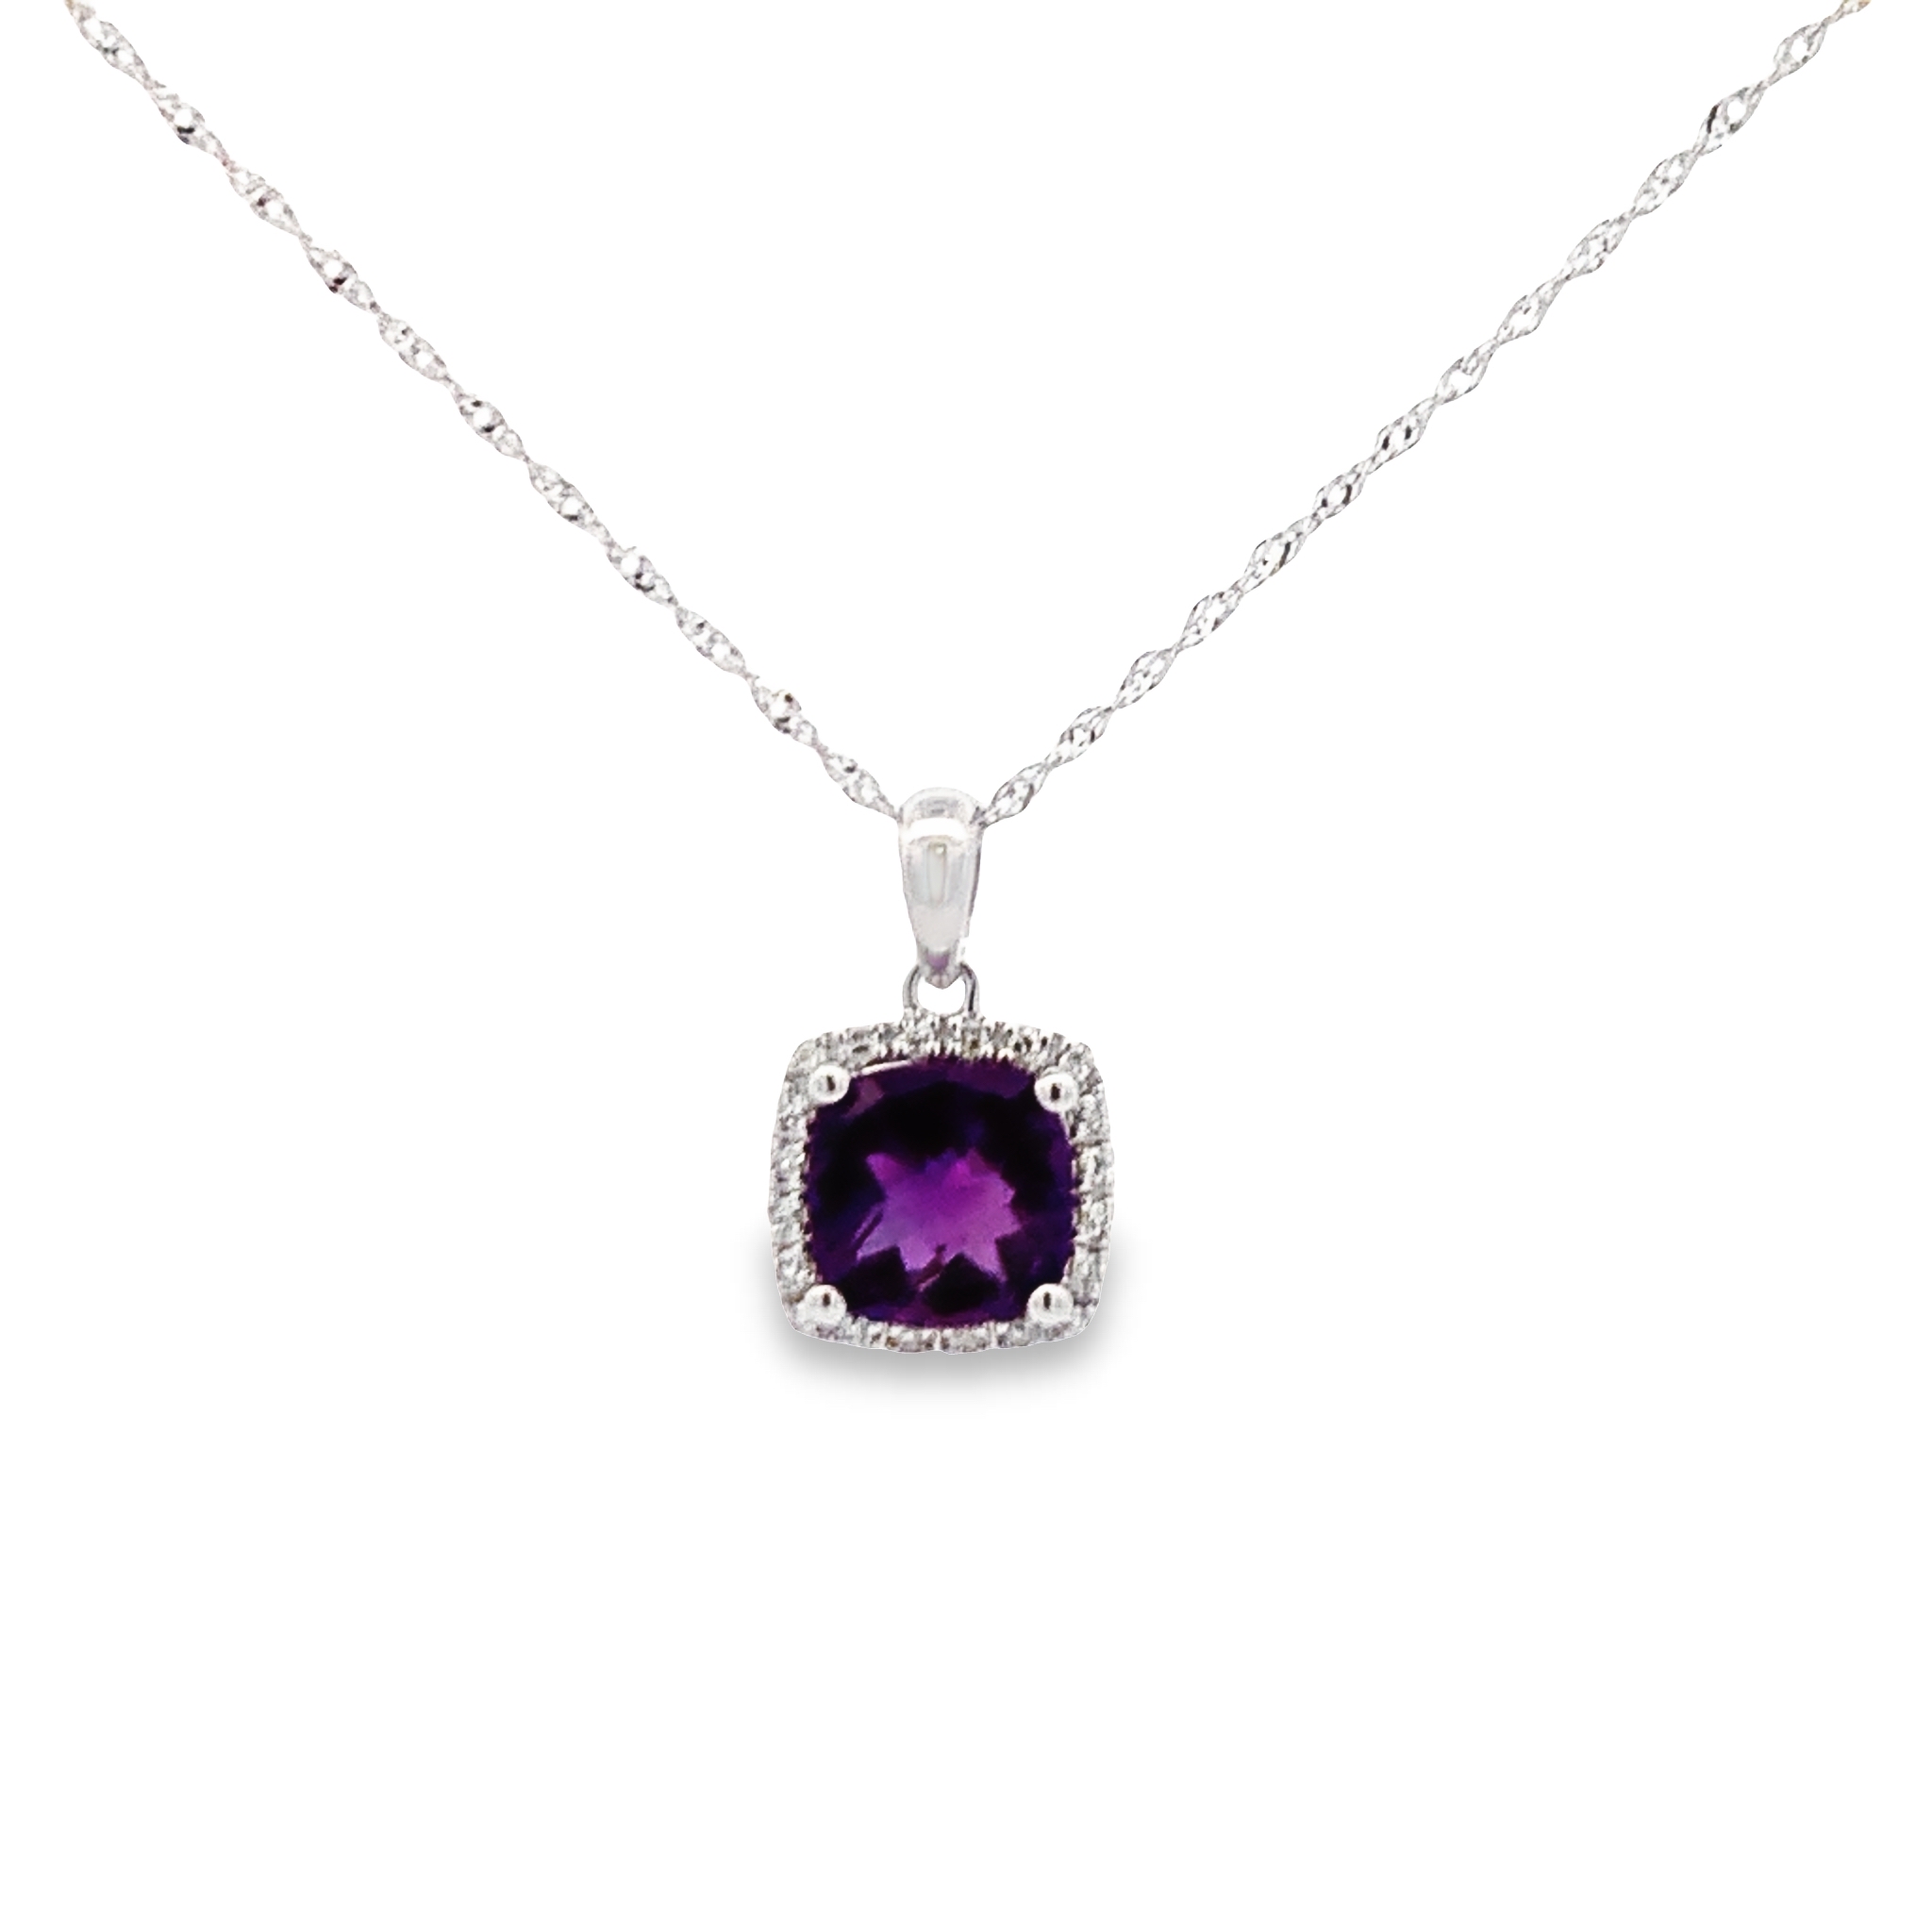 14K White Gold Amethyst and Diamond Pendant Necklace